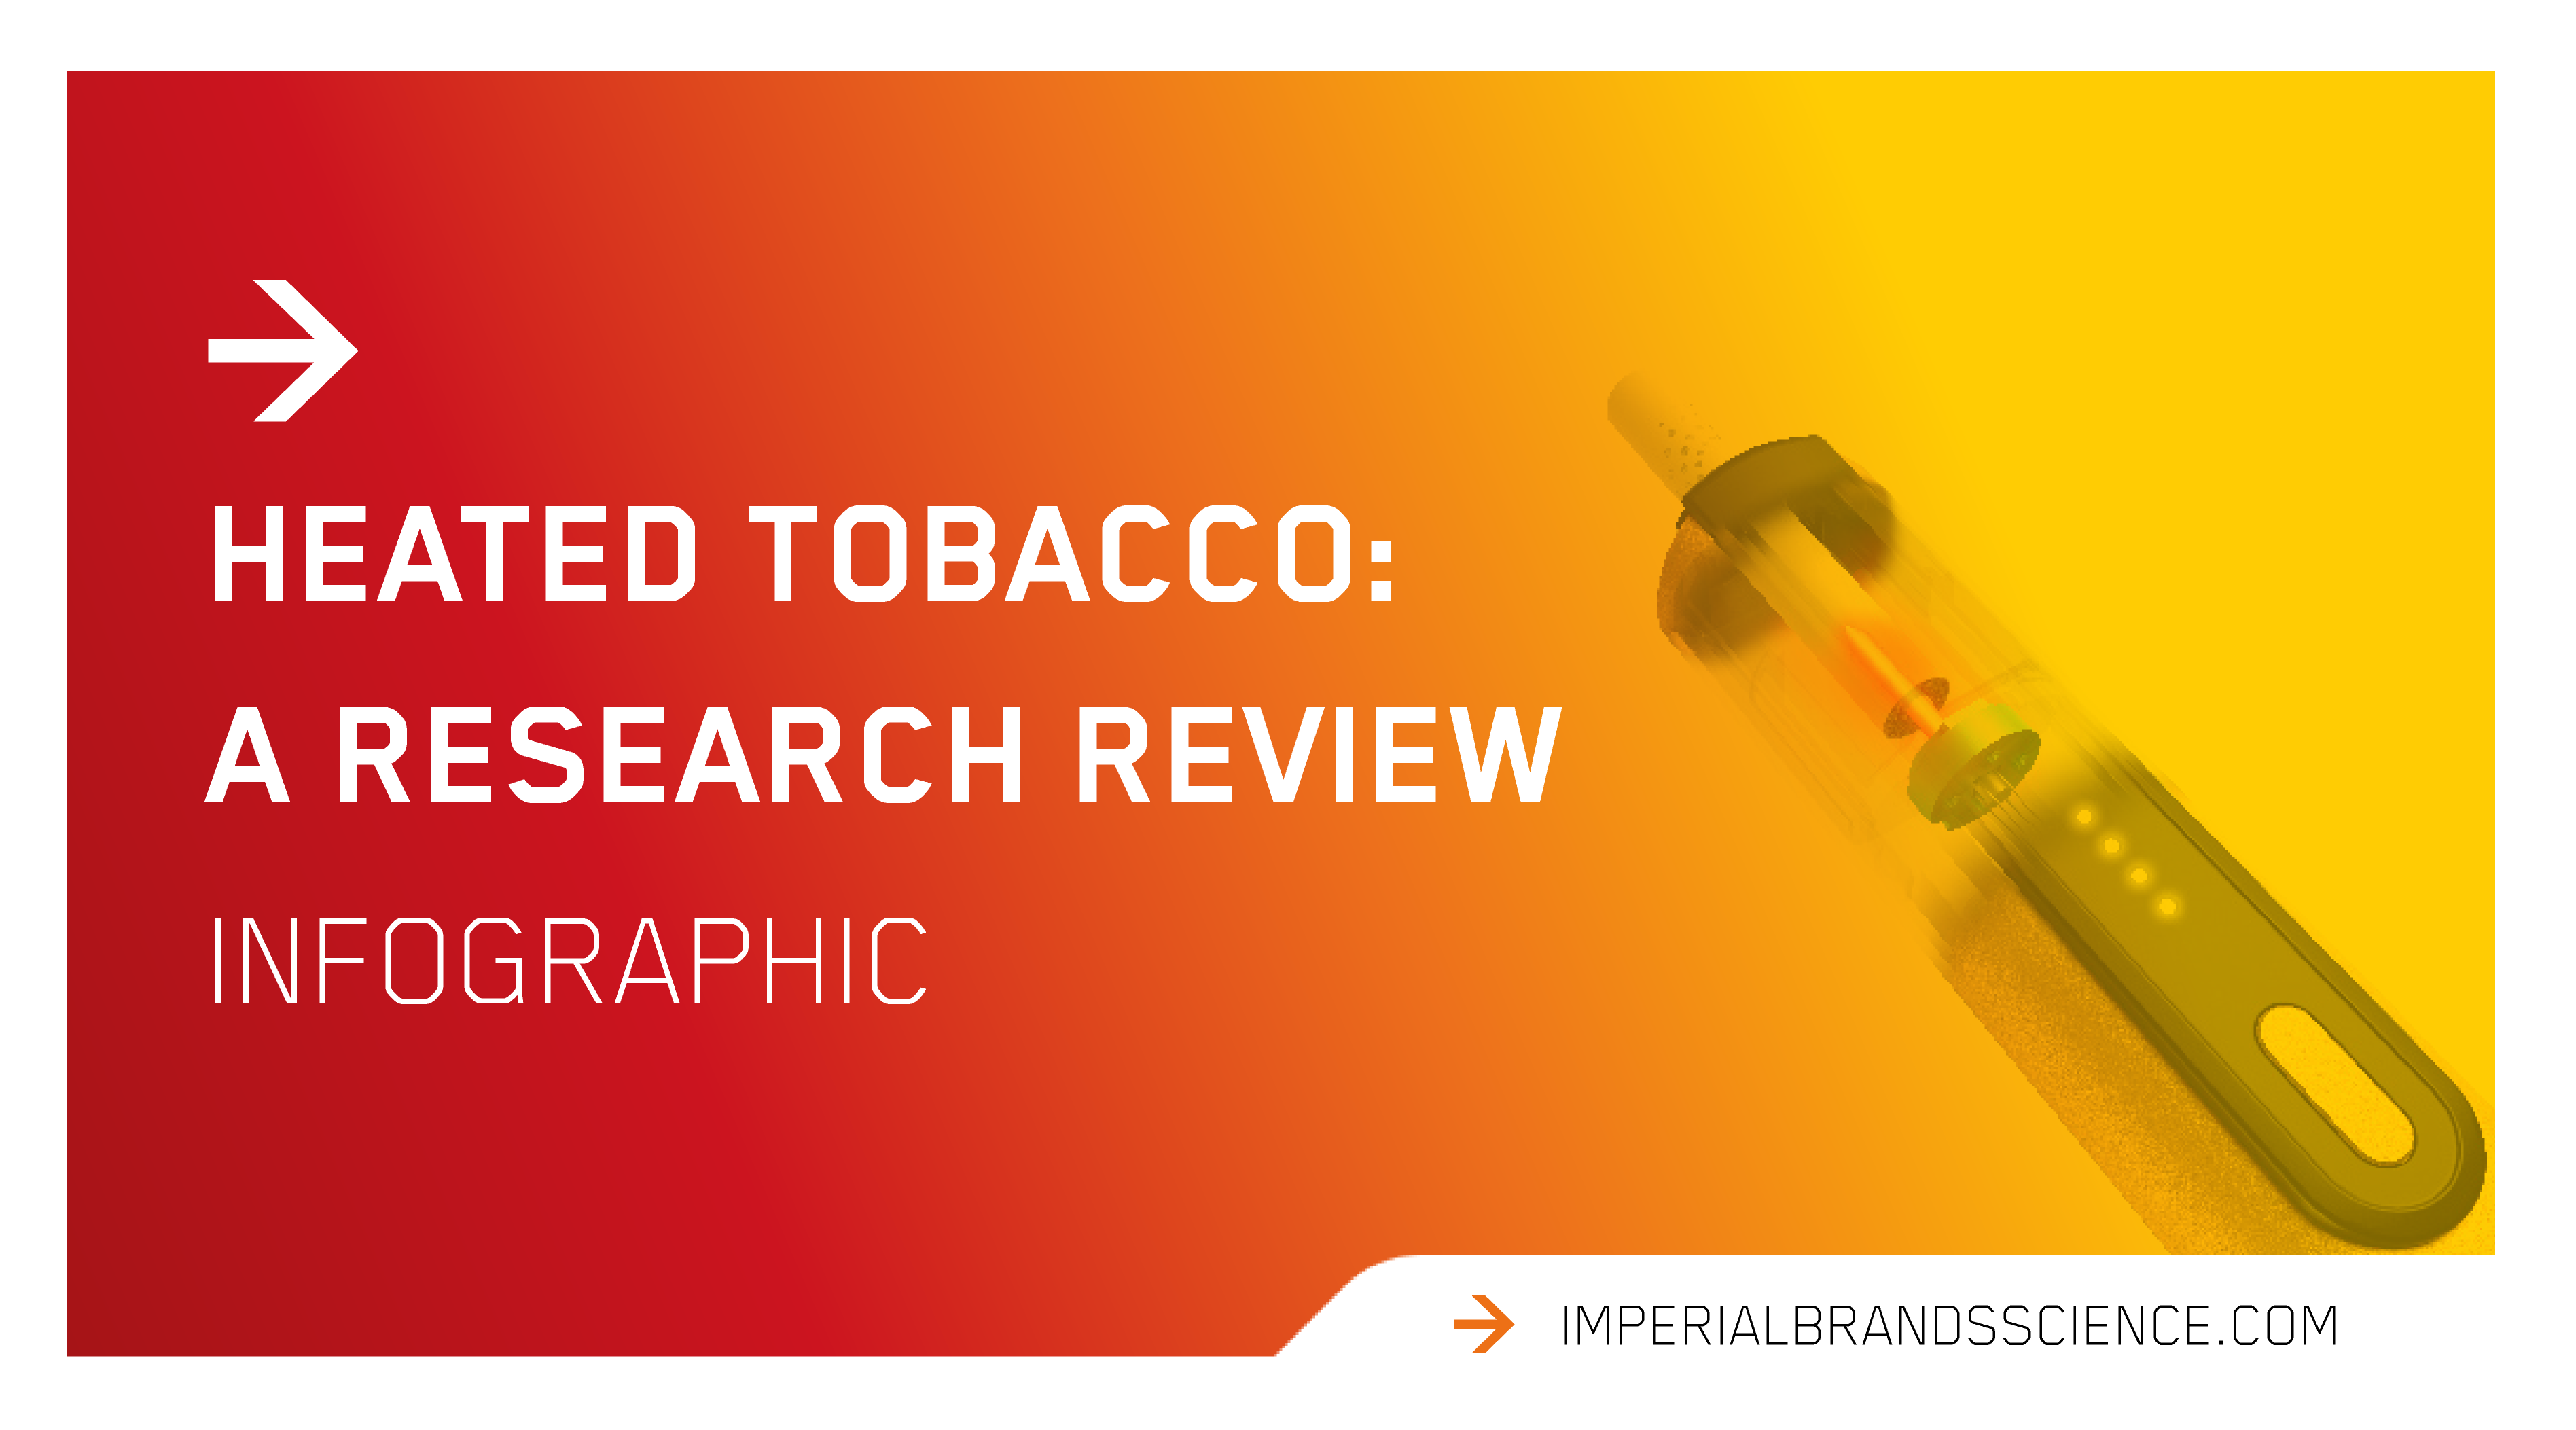 Heated Tobacco science: a category review infographic